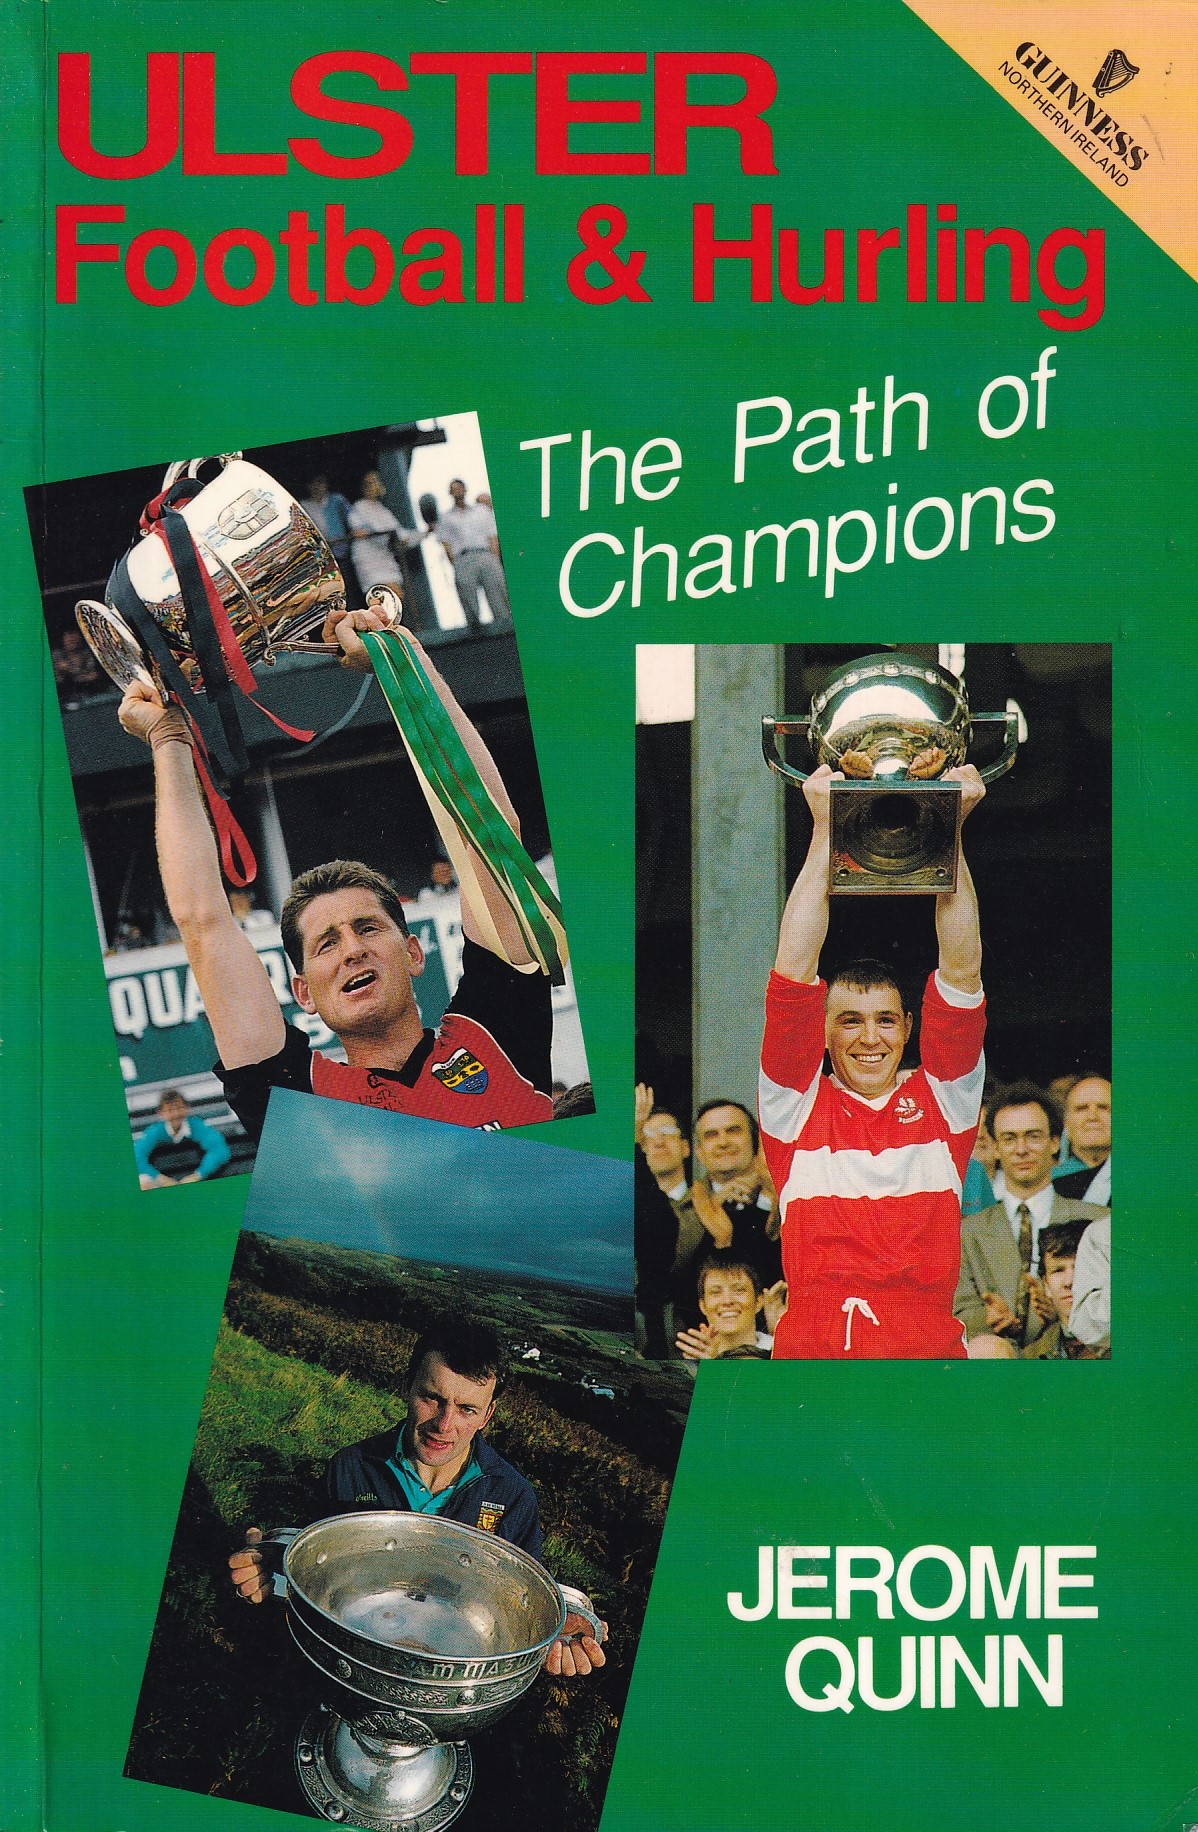 Ulster Football and Hurling: The Path of Champions | Jerome Quinn | Charlie Byrne's